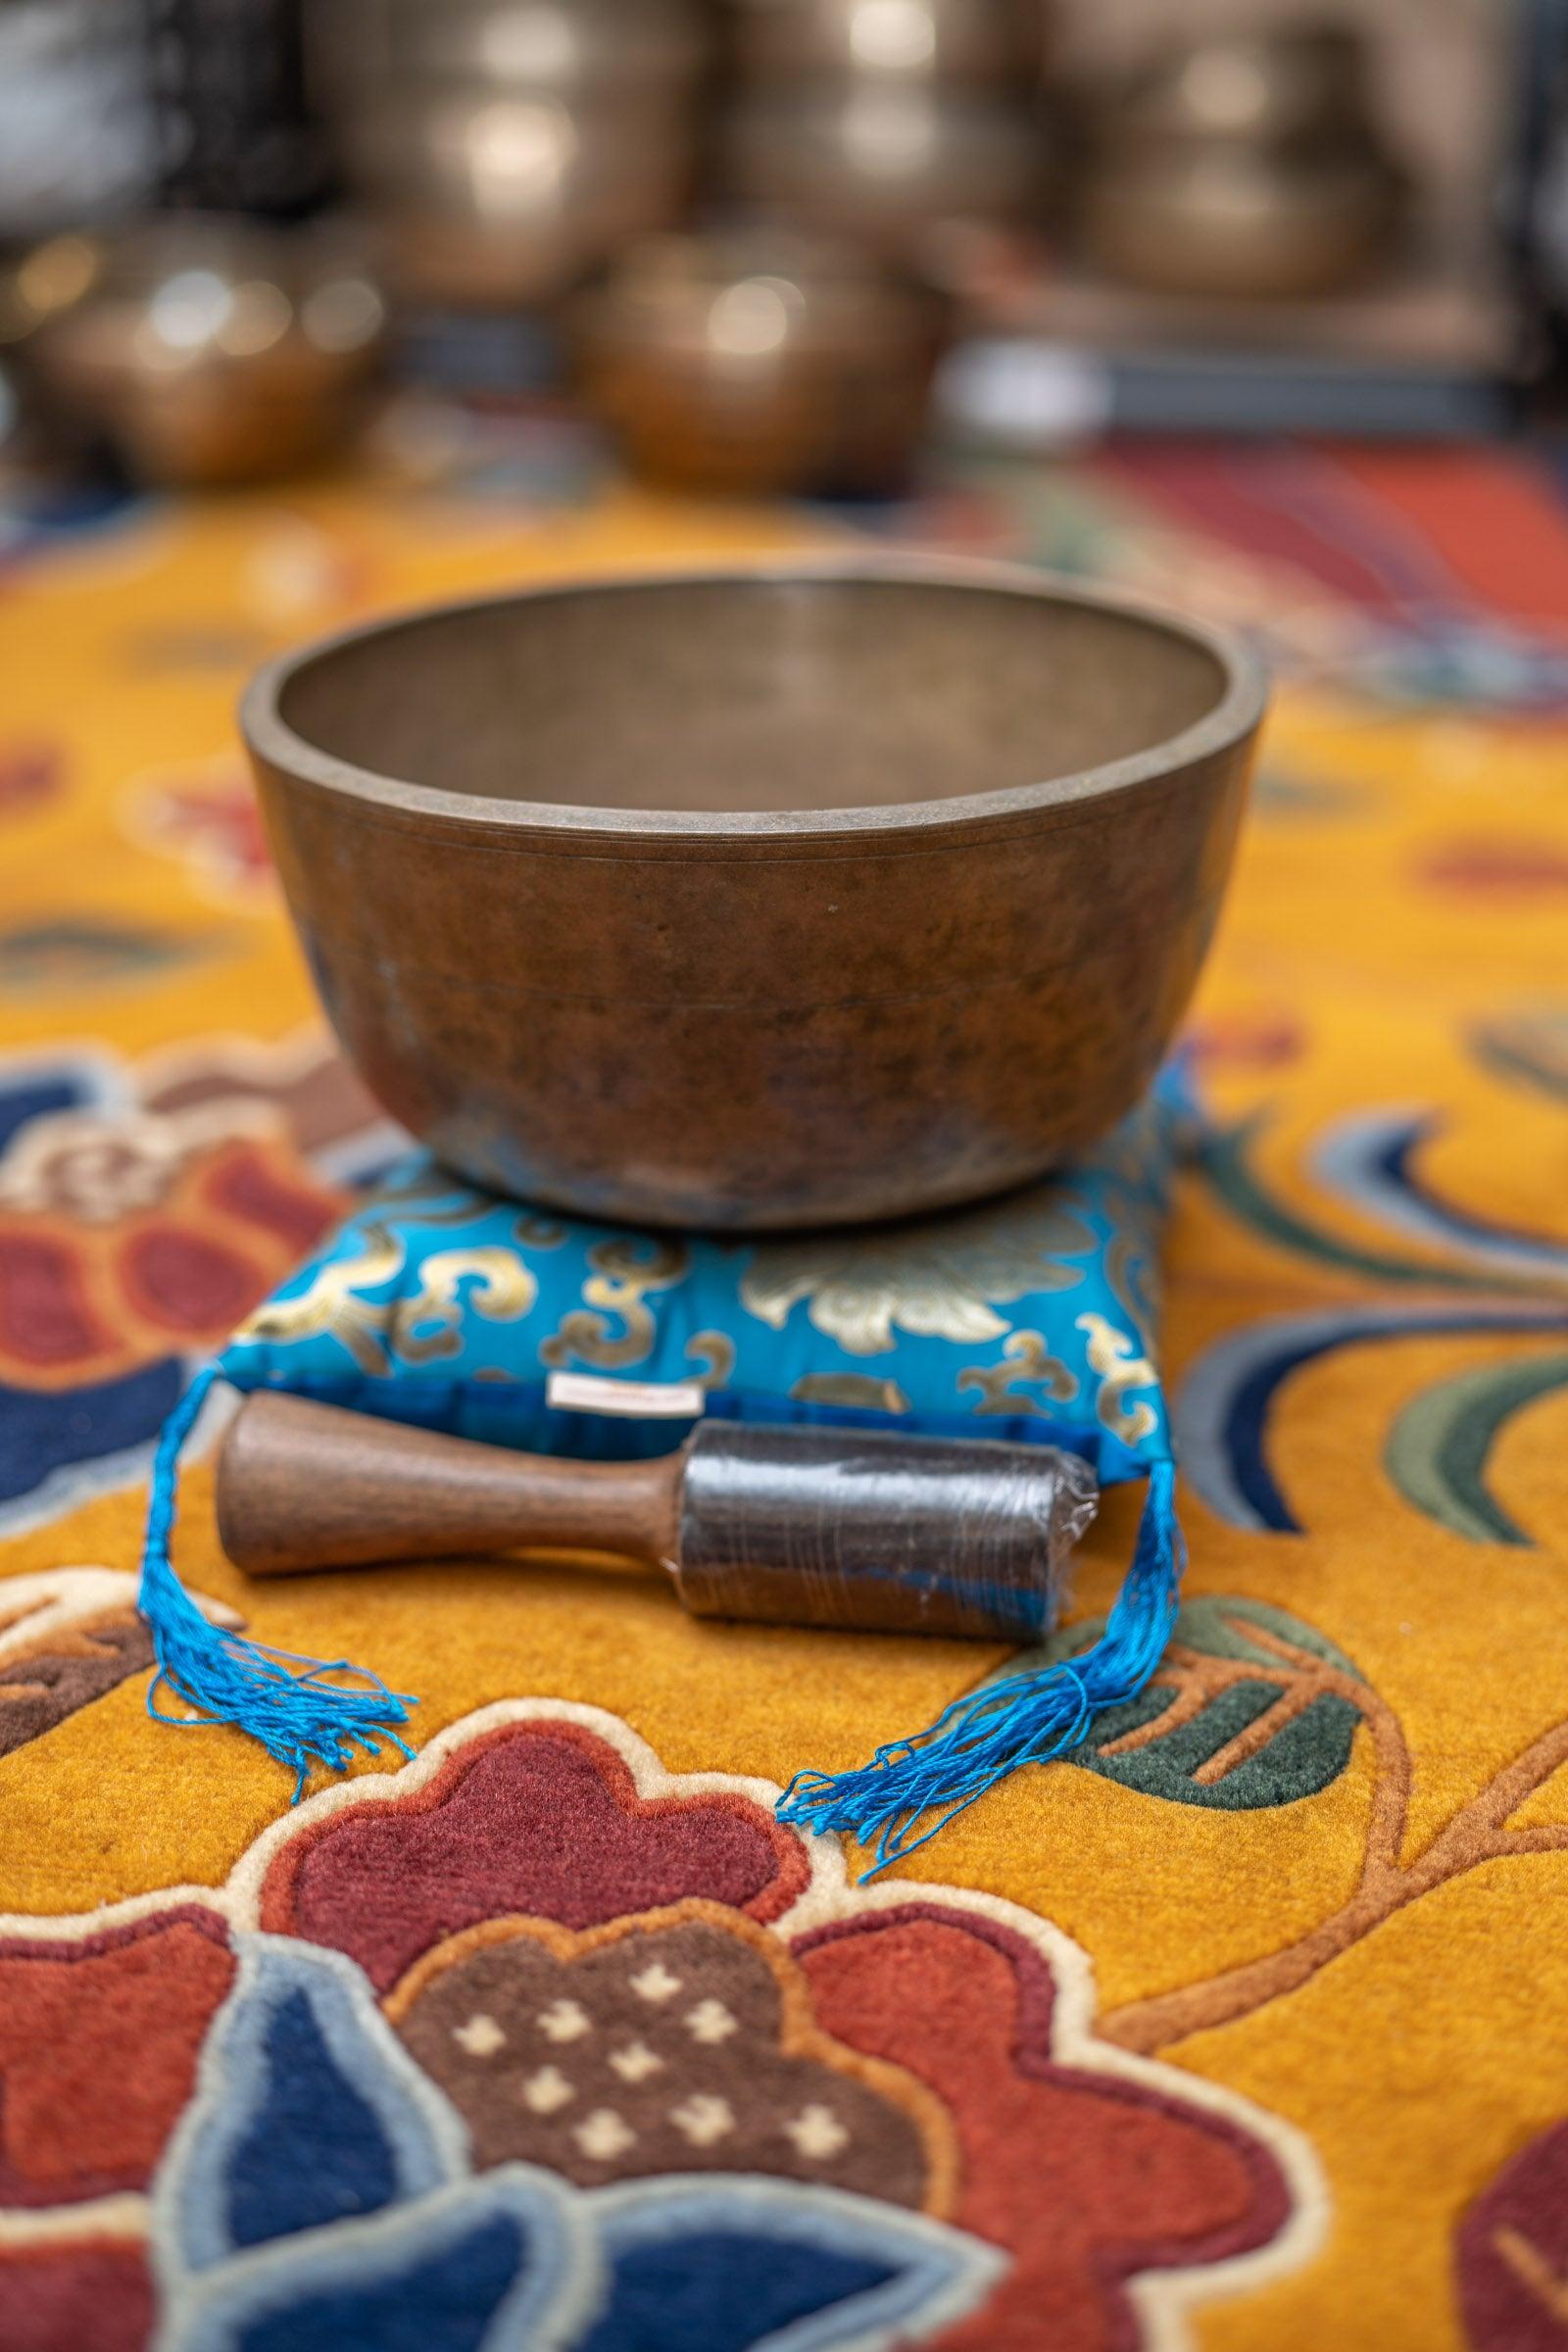 Small Antique Singing bowl with flat cushion and wooden mallet - Handmade in Nepal - HimalayasShop